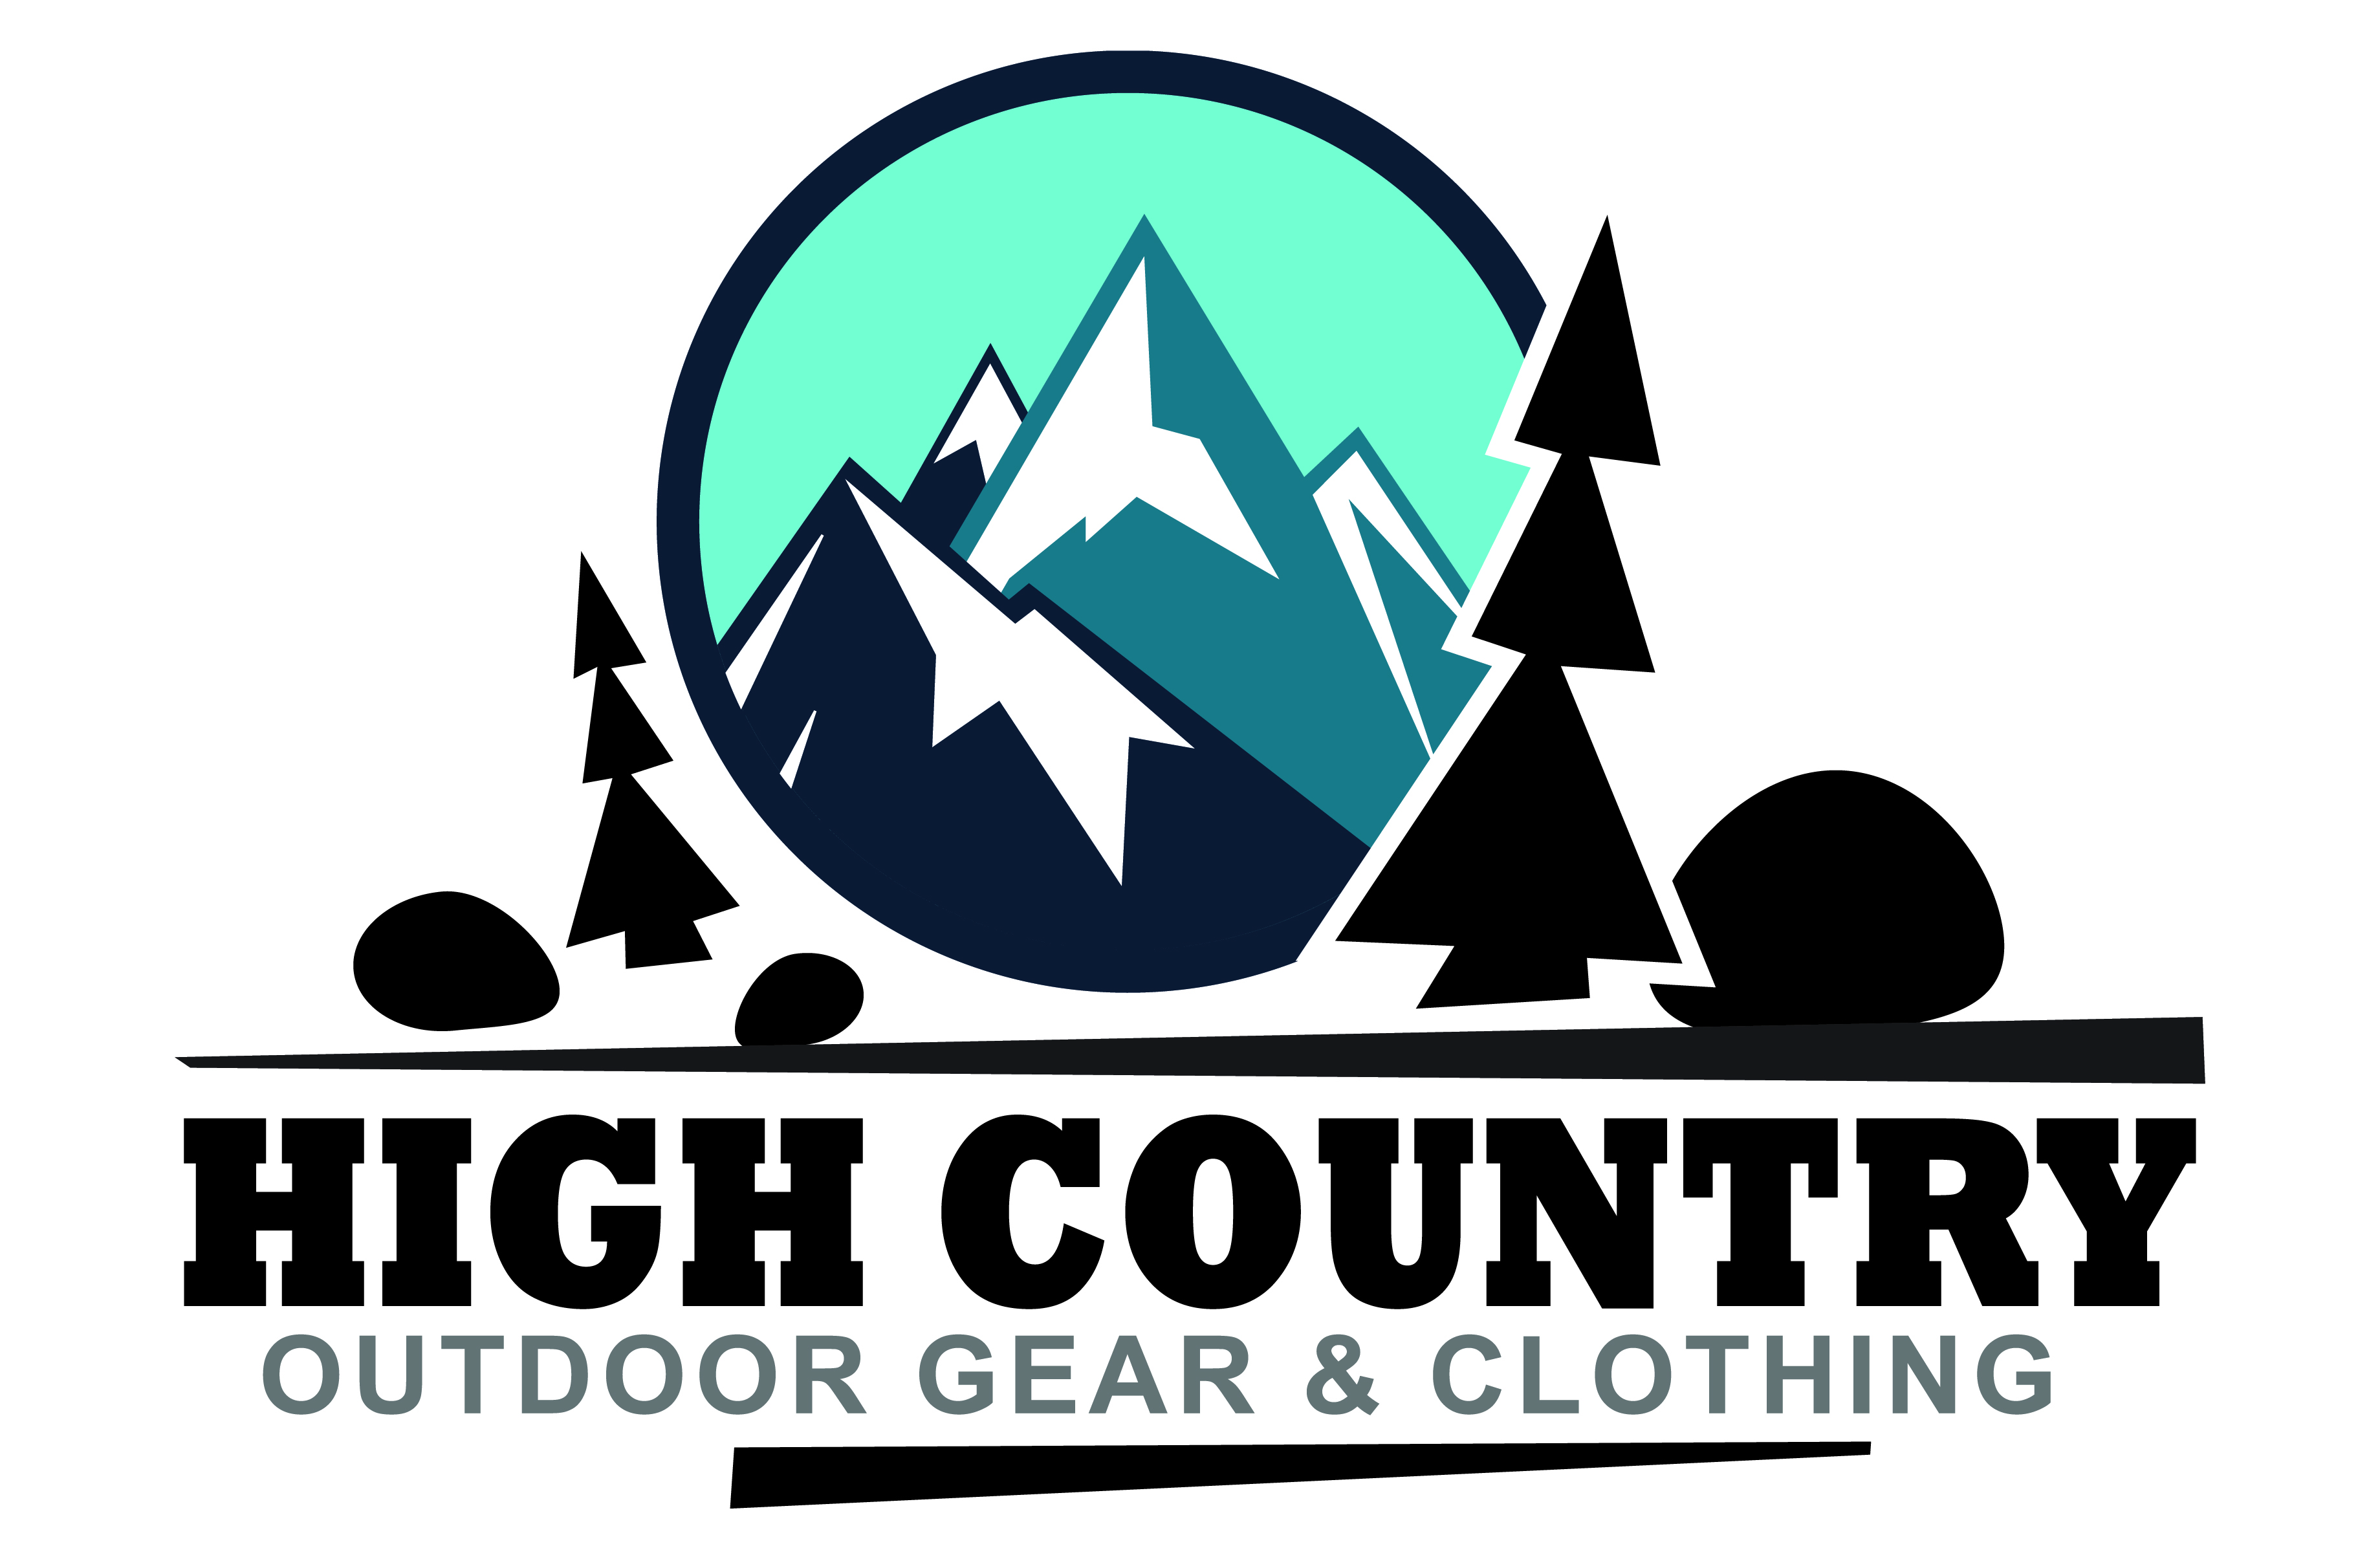 High Country Outdoor Gear and Clothing logo